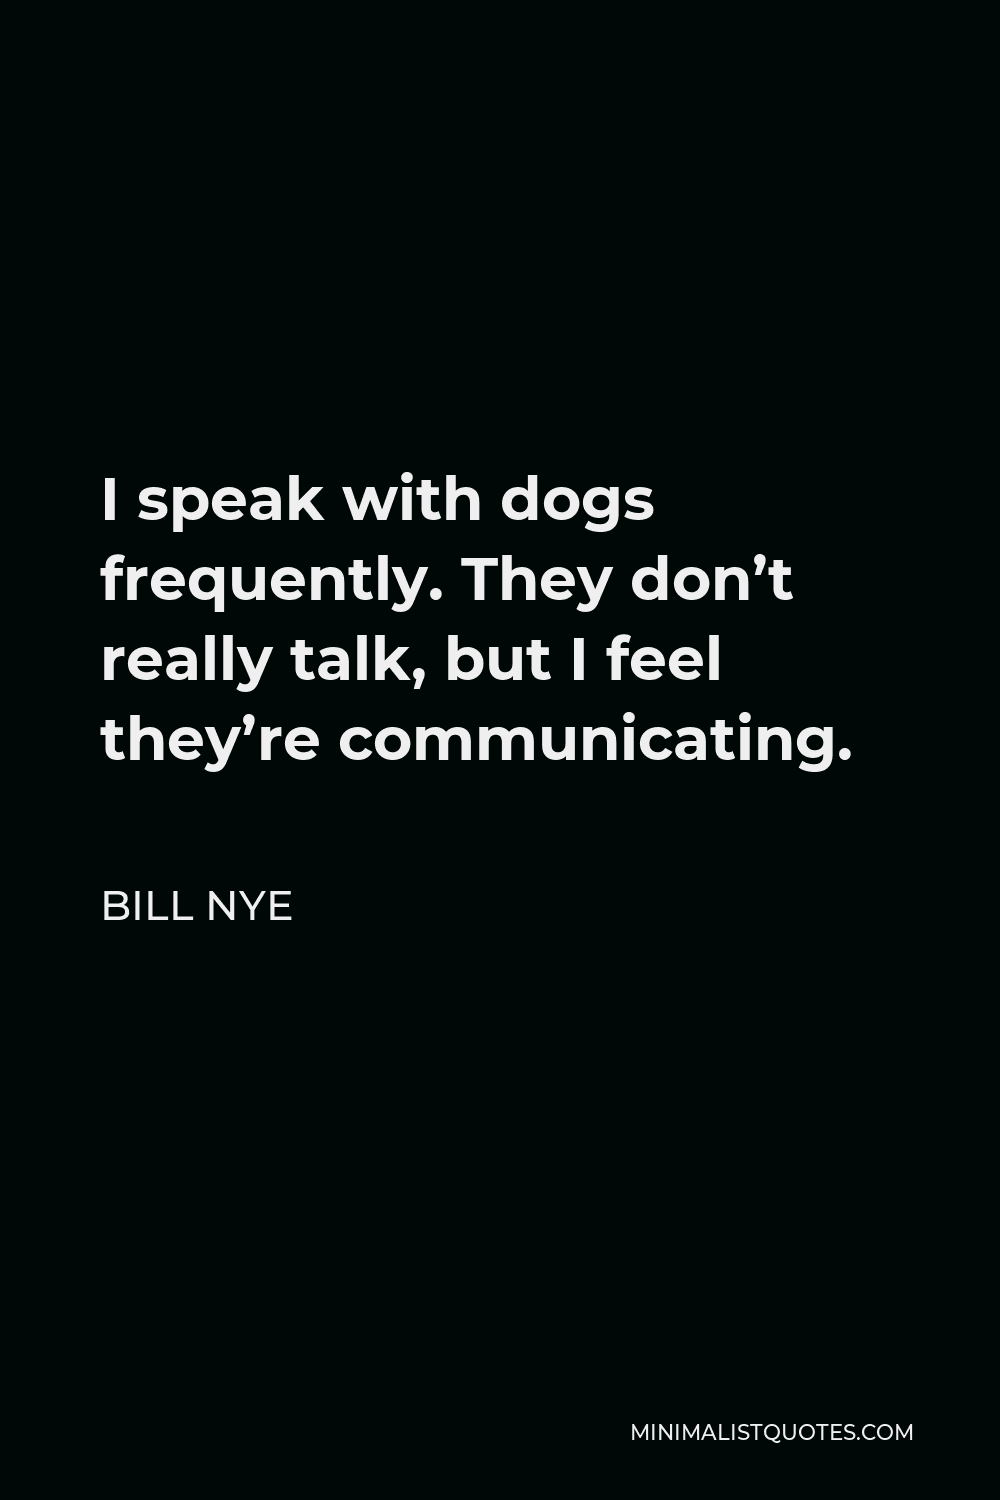 Bill Nye Quote - I speak with dogs frequently. They don’t really talk, but I feel they’re communicating.